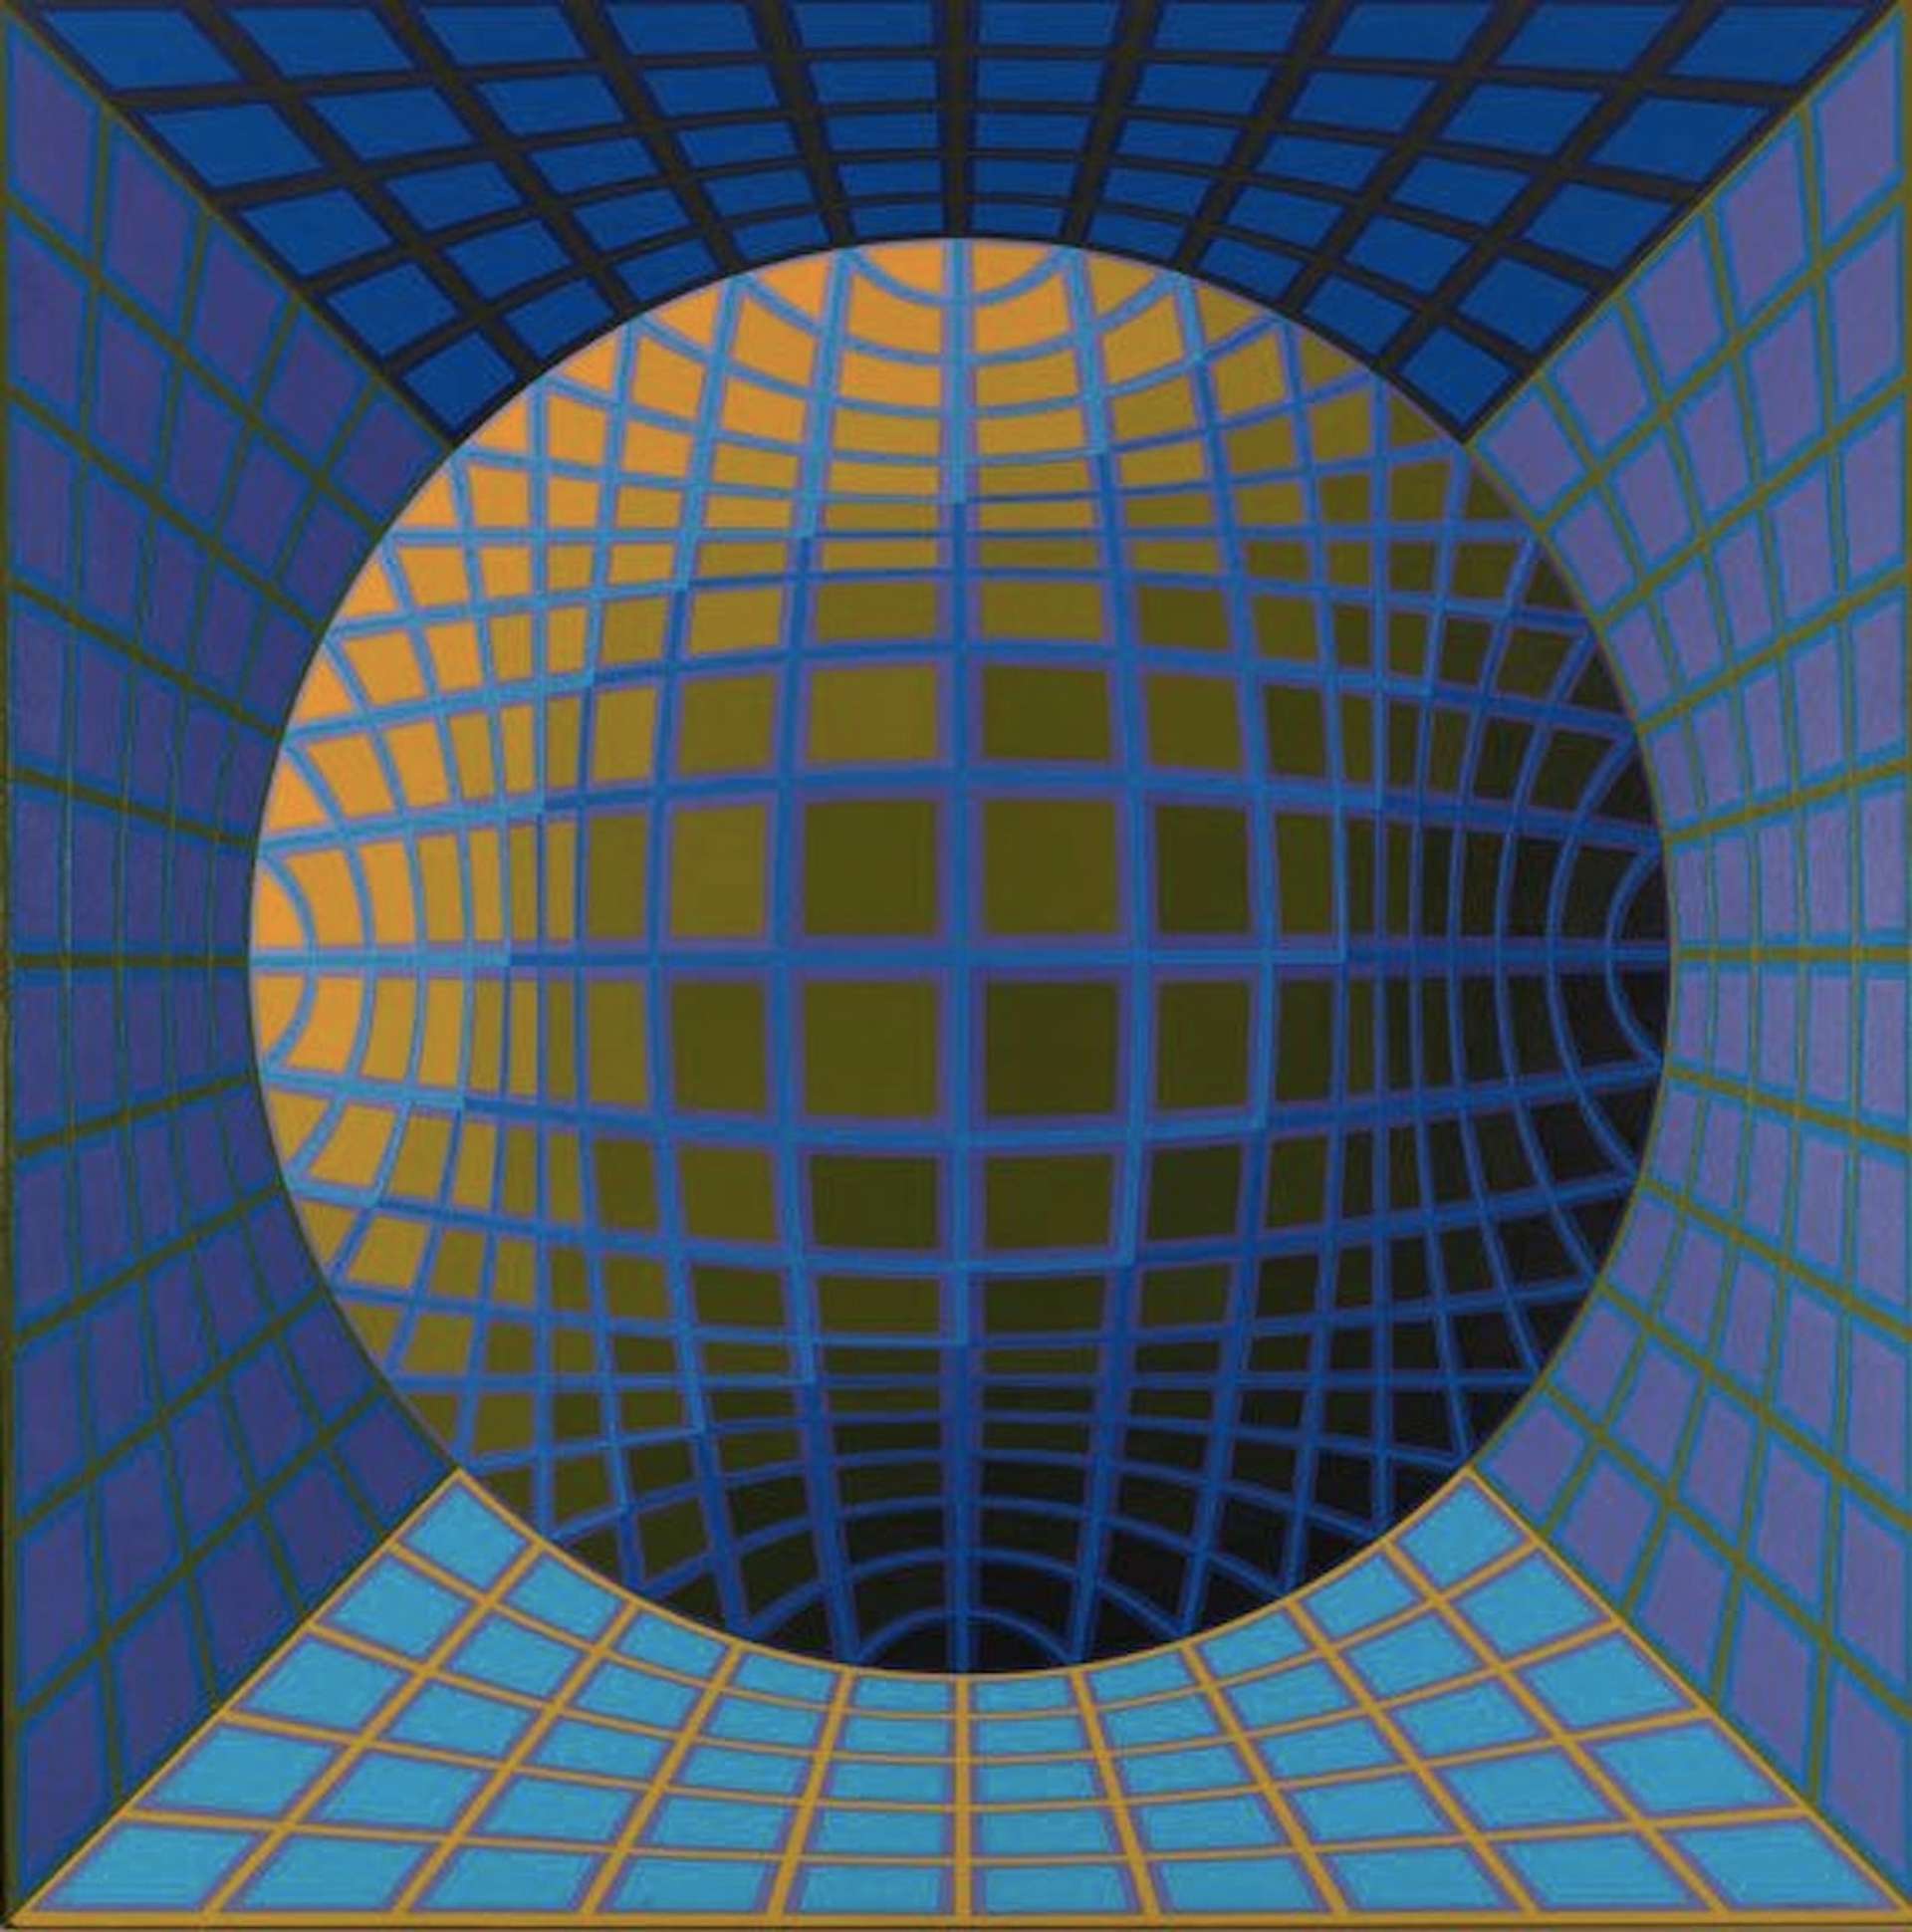  A rectangular canvas composed of blues, purples, and gold, imprinted with a skewed pattern of squares strategically positioned to create a tunnel vision optical illusion effect, with a circle emerging from the centre.